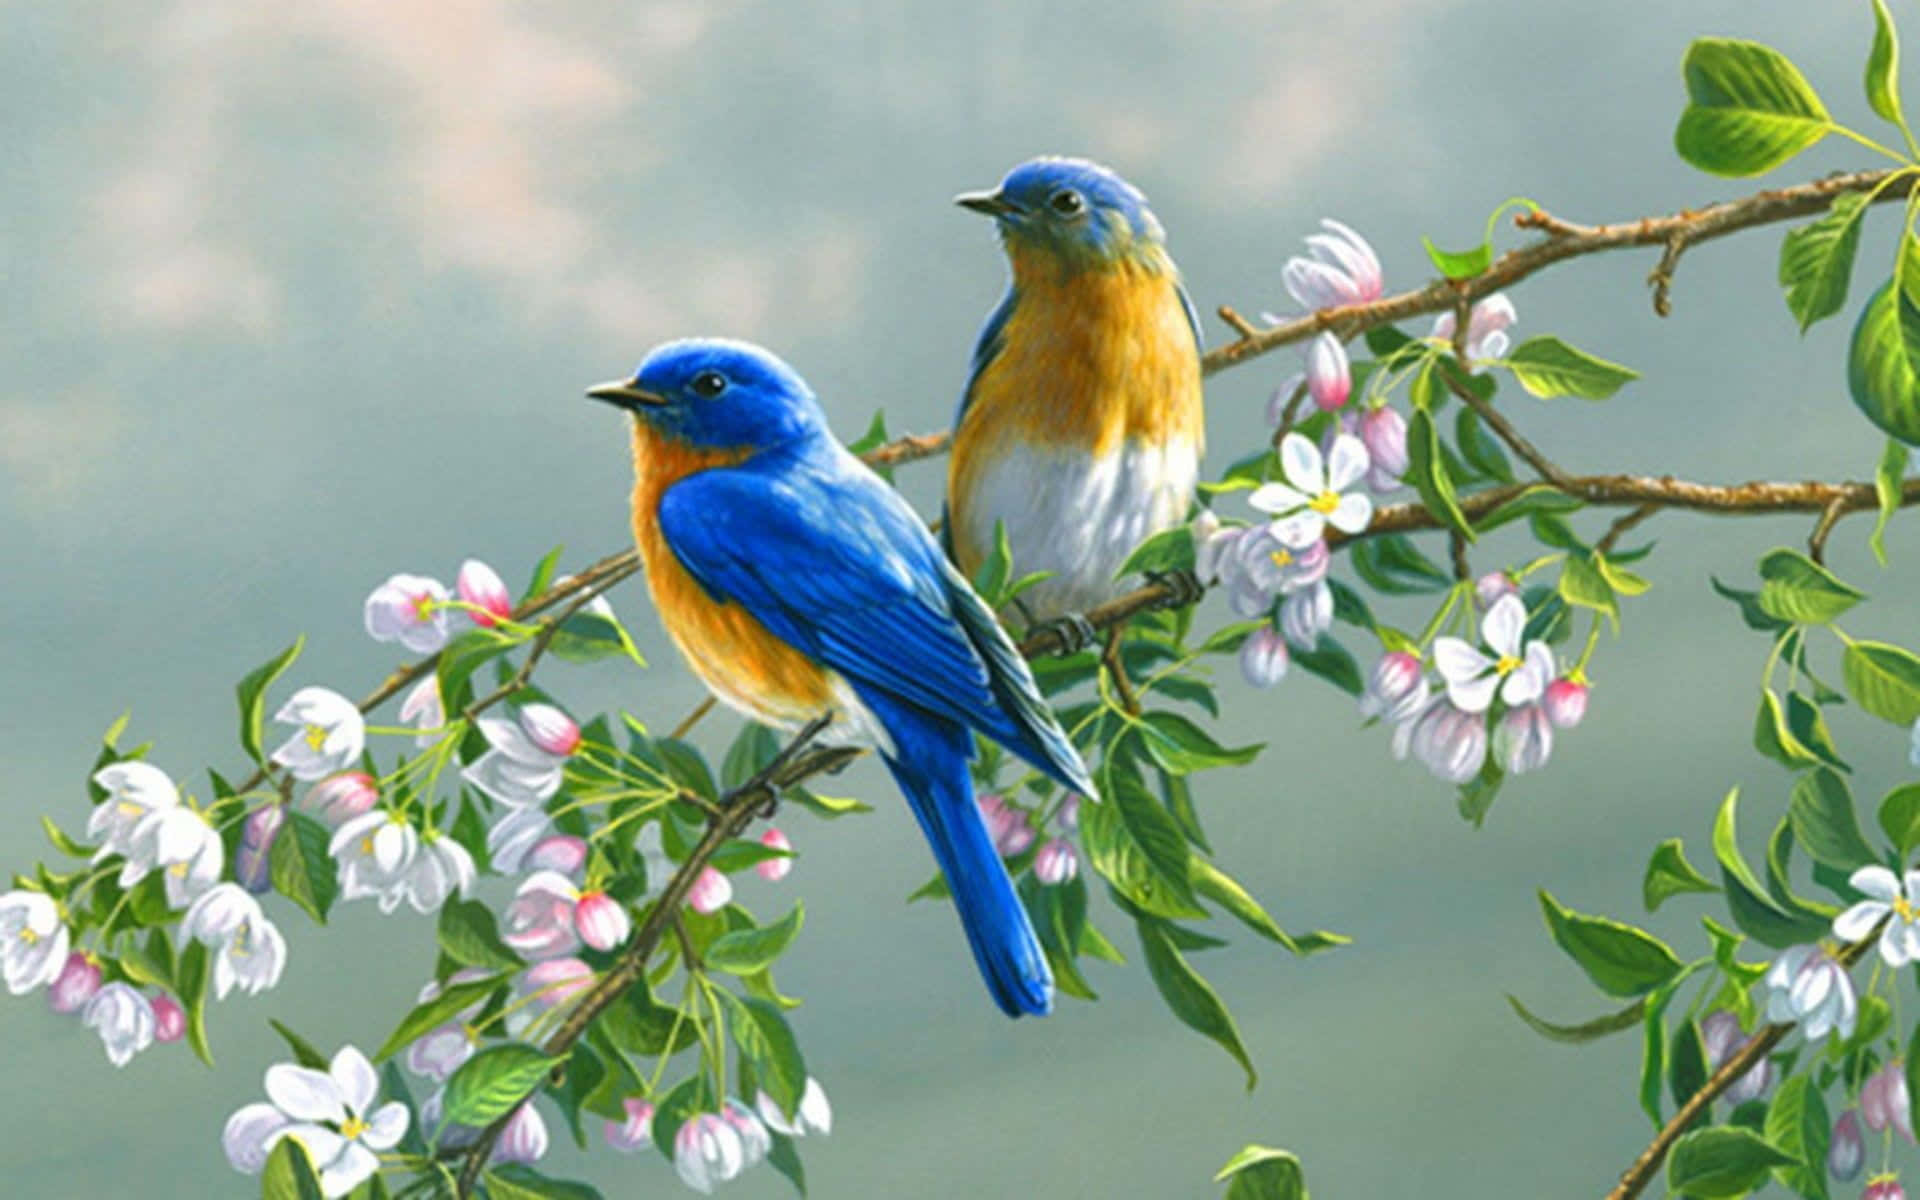 Charming Birds Perched on Blooming Cherry Tree Branches Wallpaper